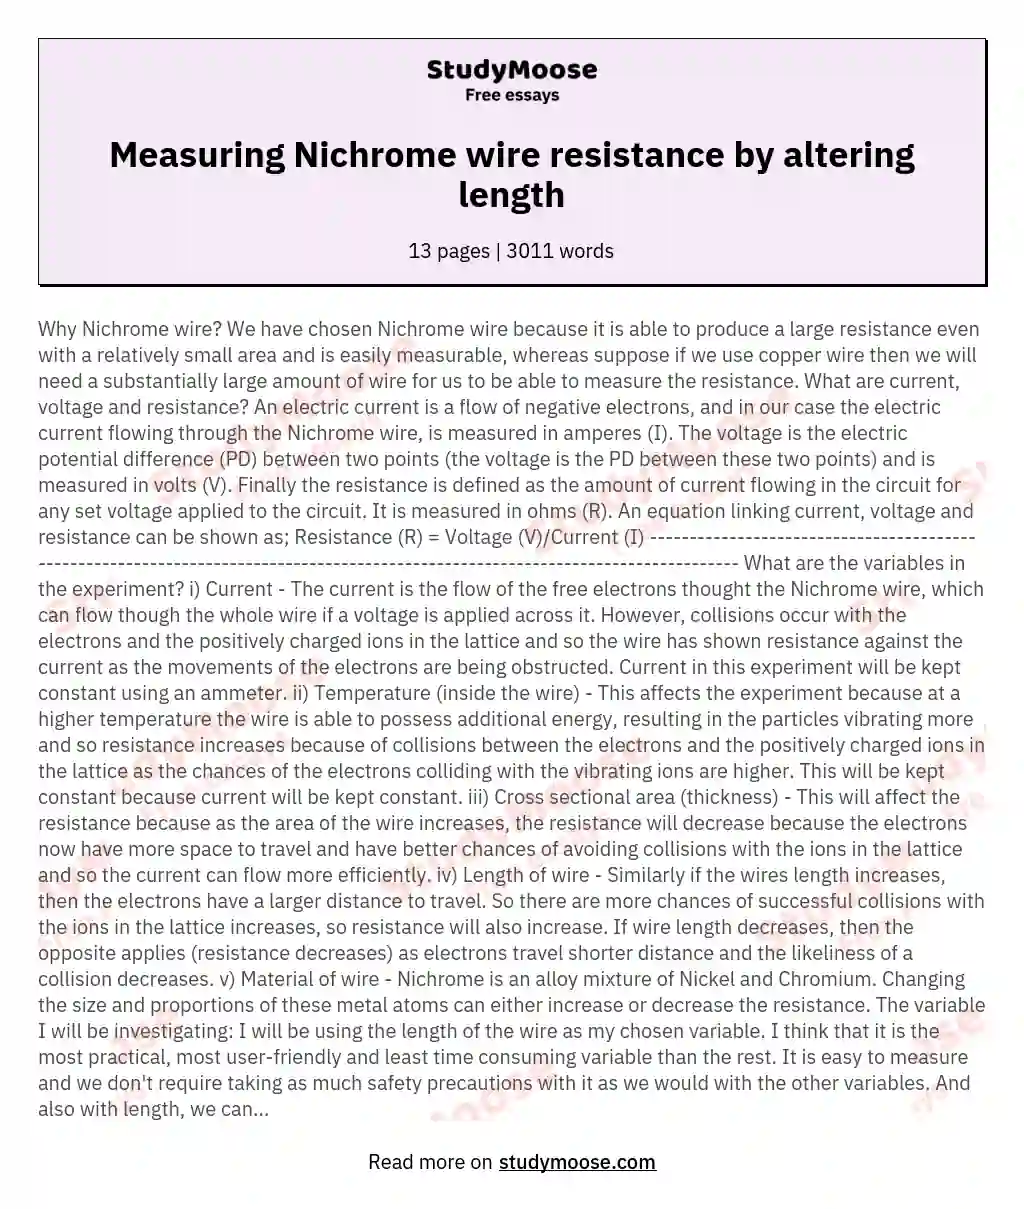 My aim is to devise and experiment to measure the effect on resistance by changing the length of Nichrome wire